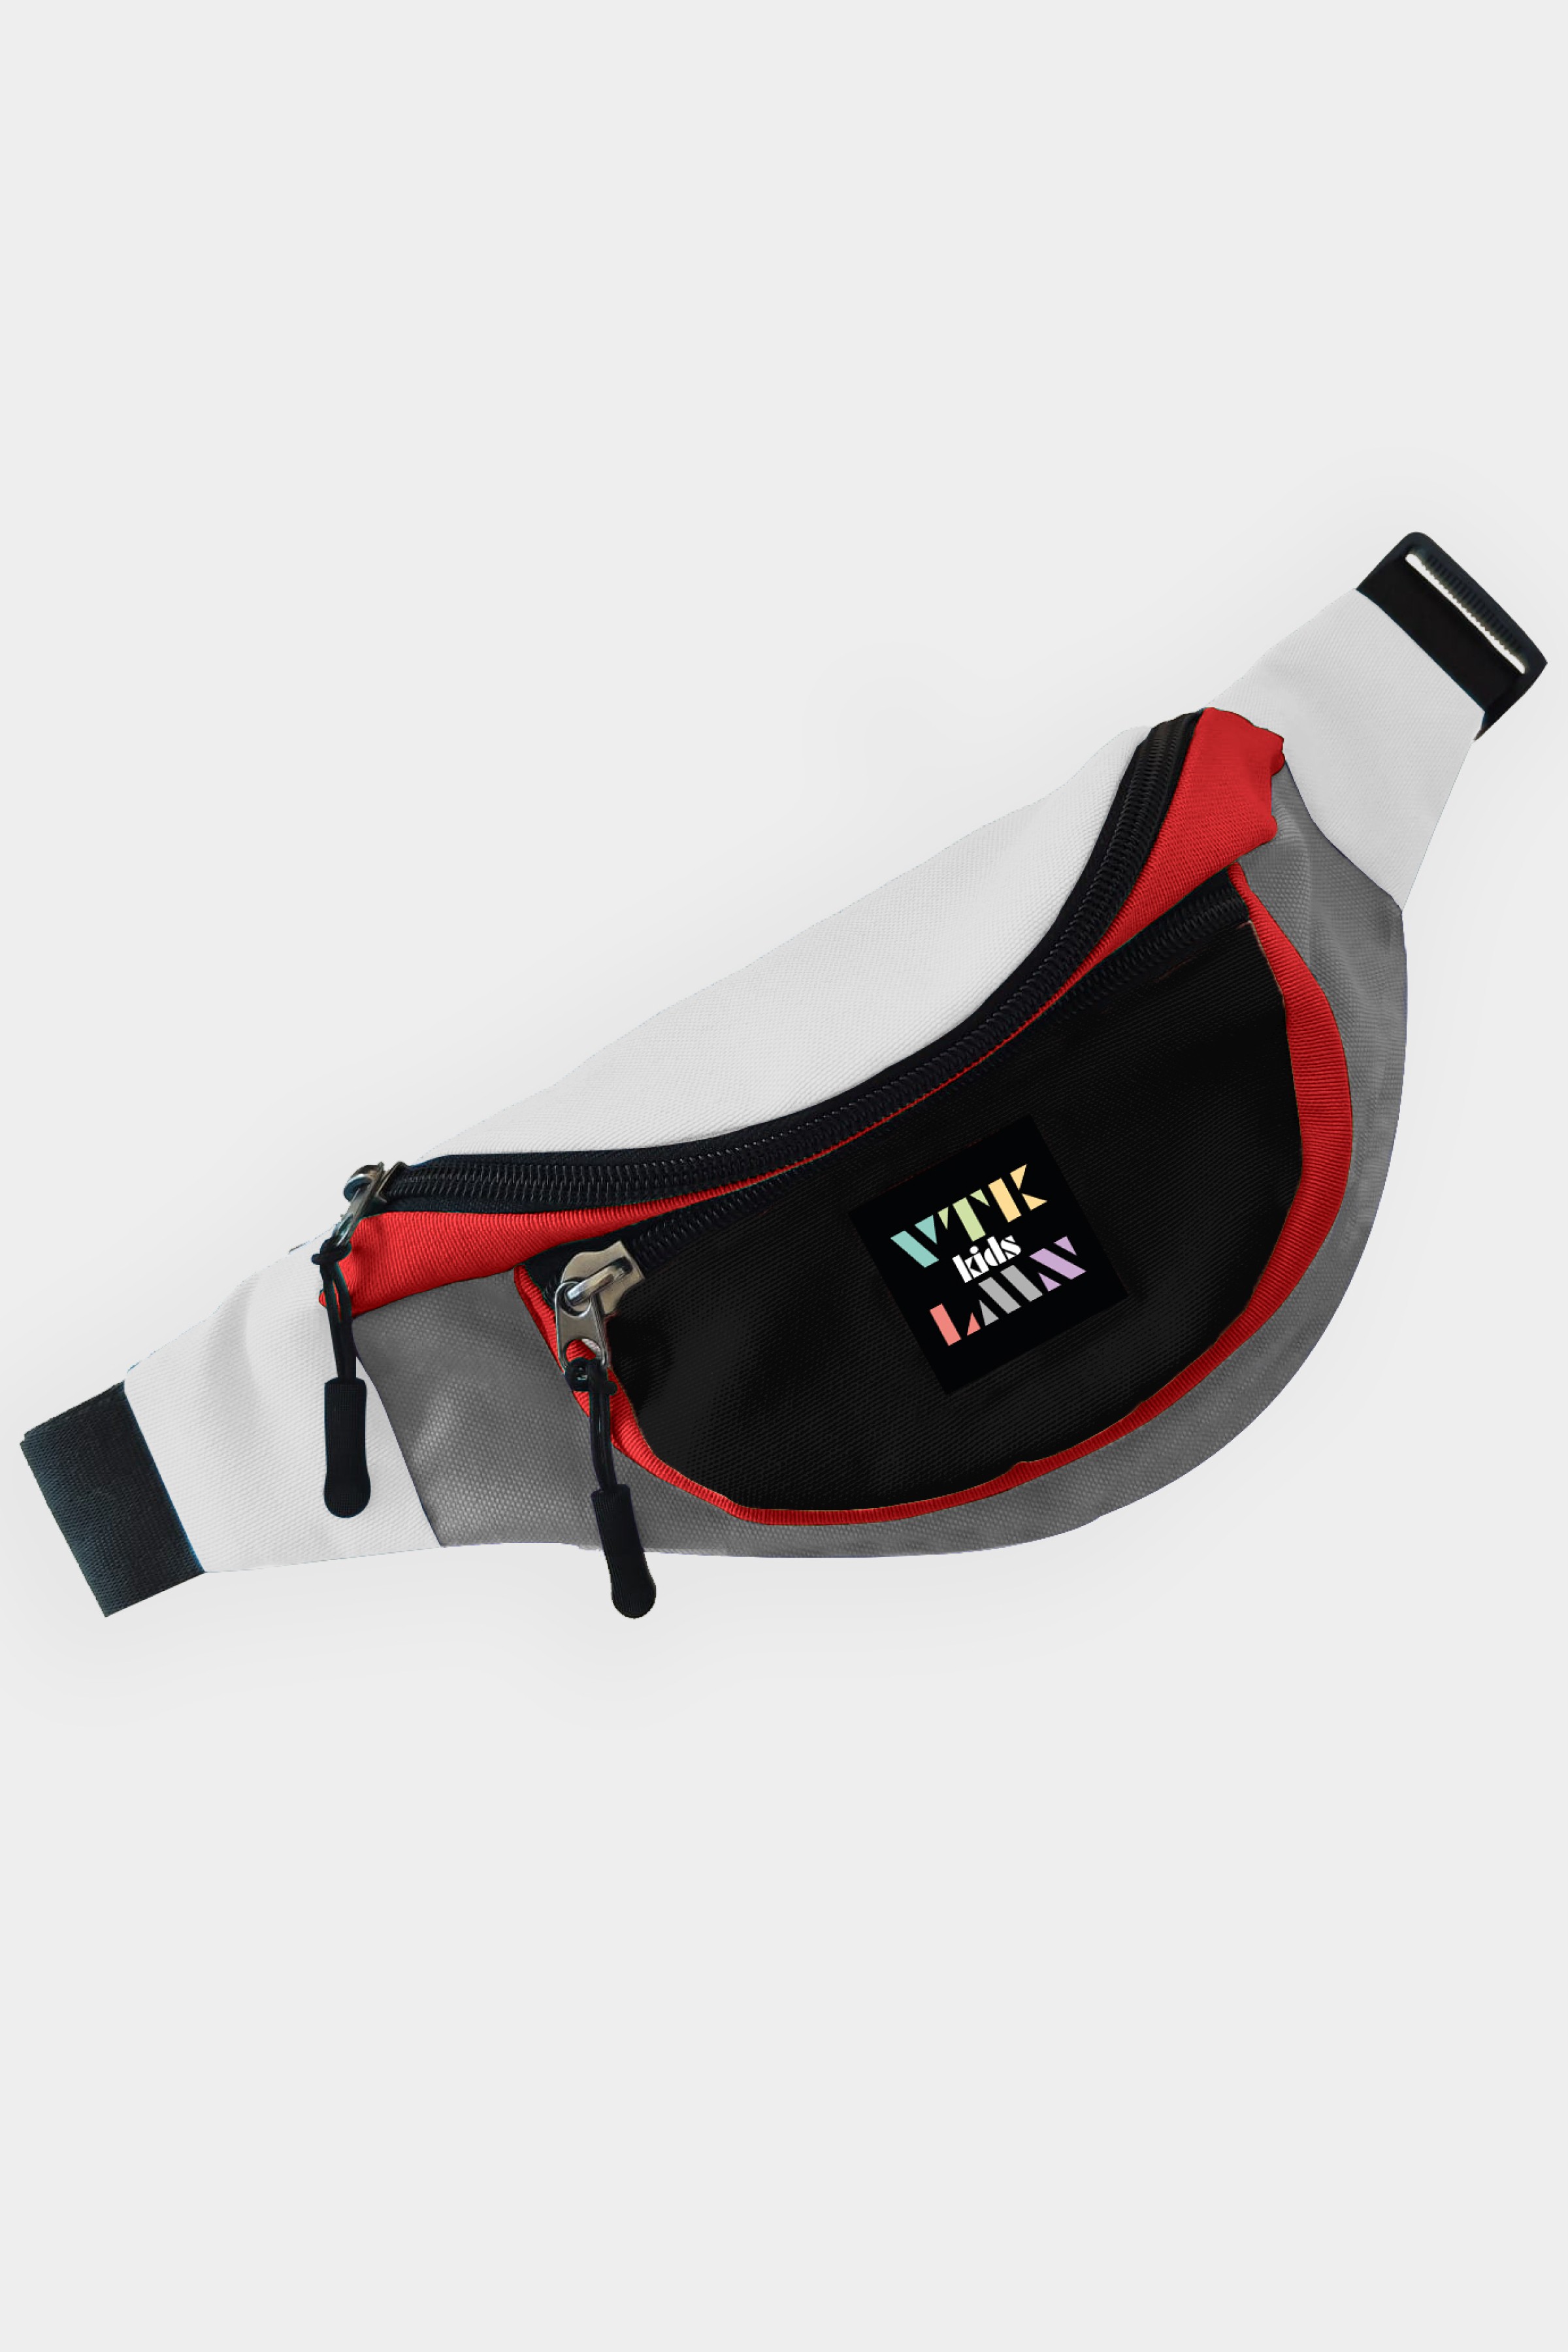 Colorful Shoulder and Waist Kid Bag - Black Red Gray White